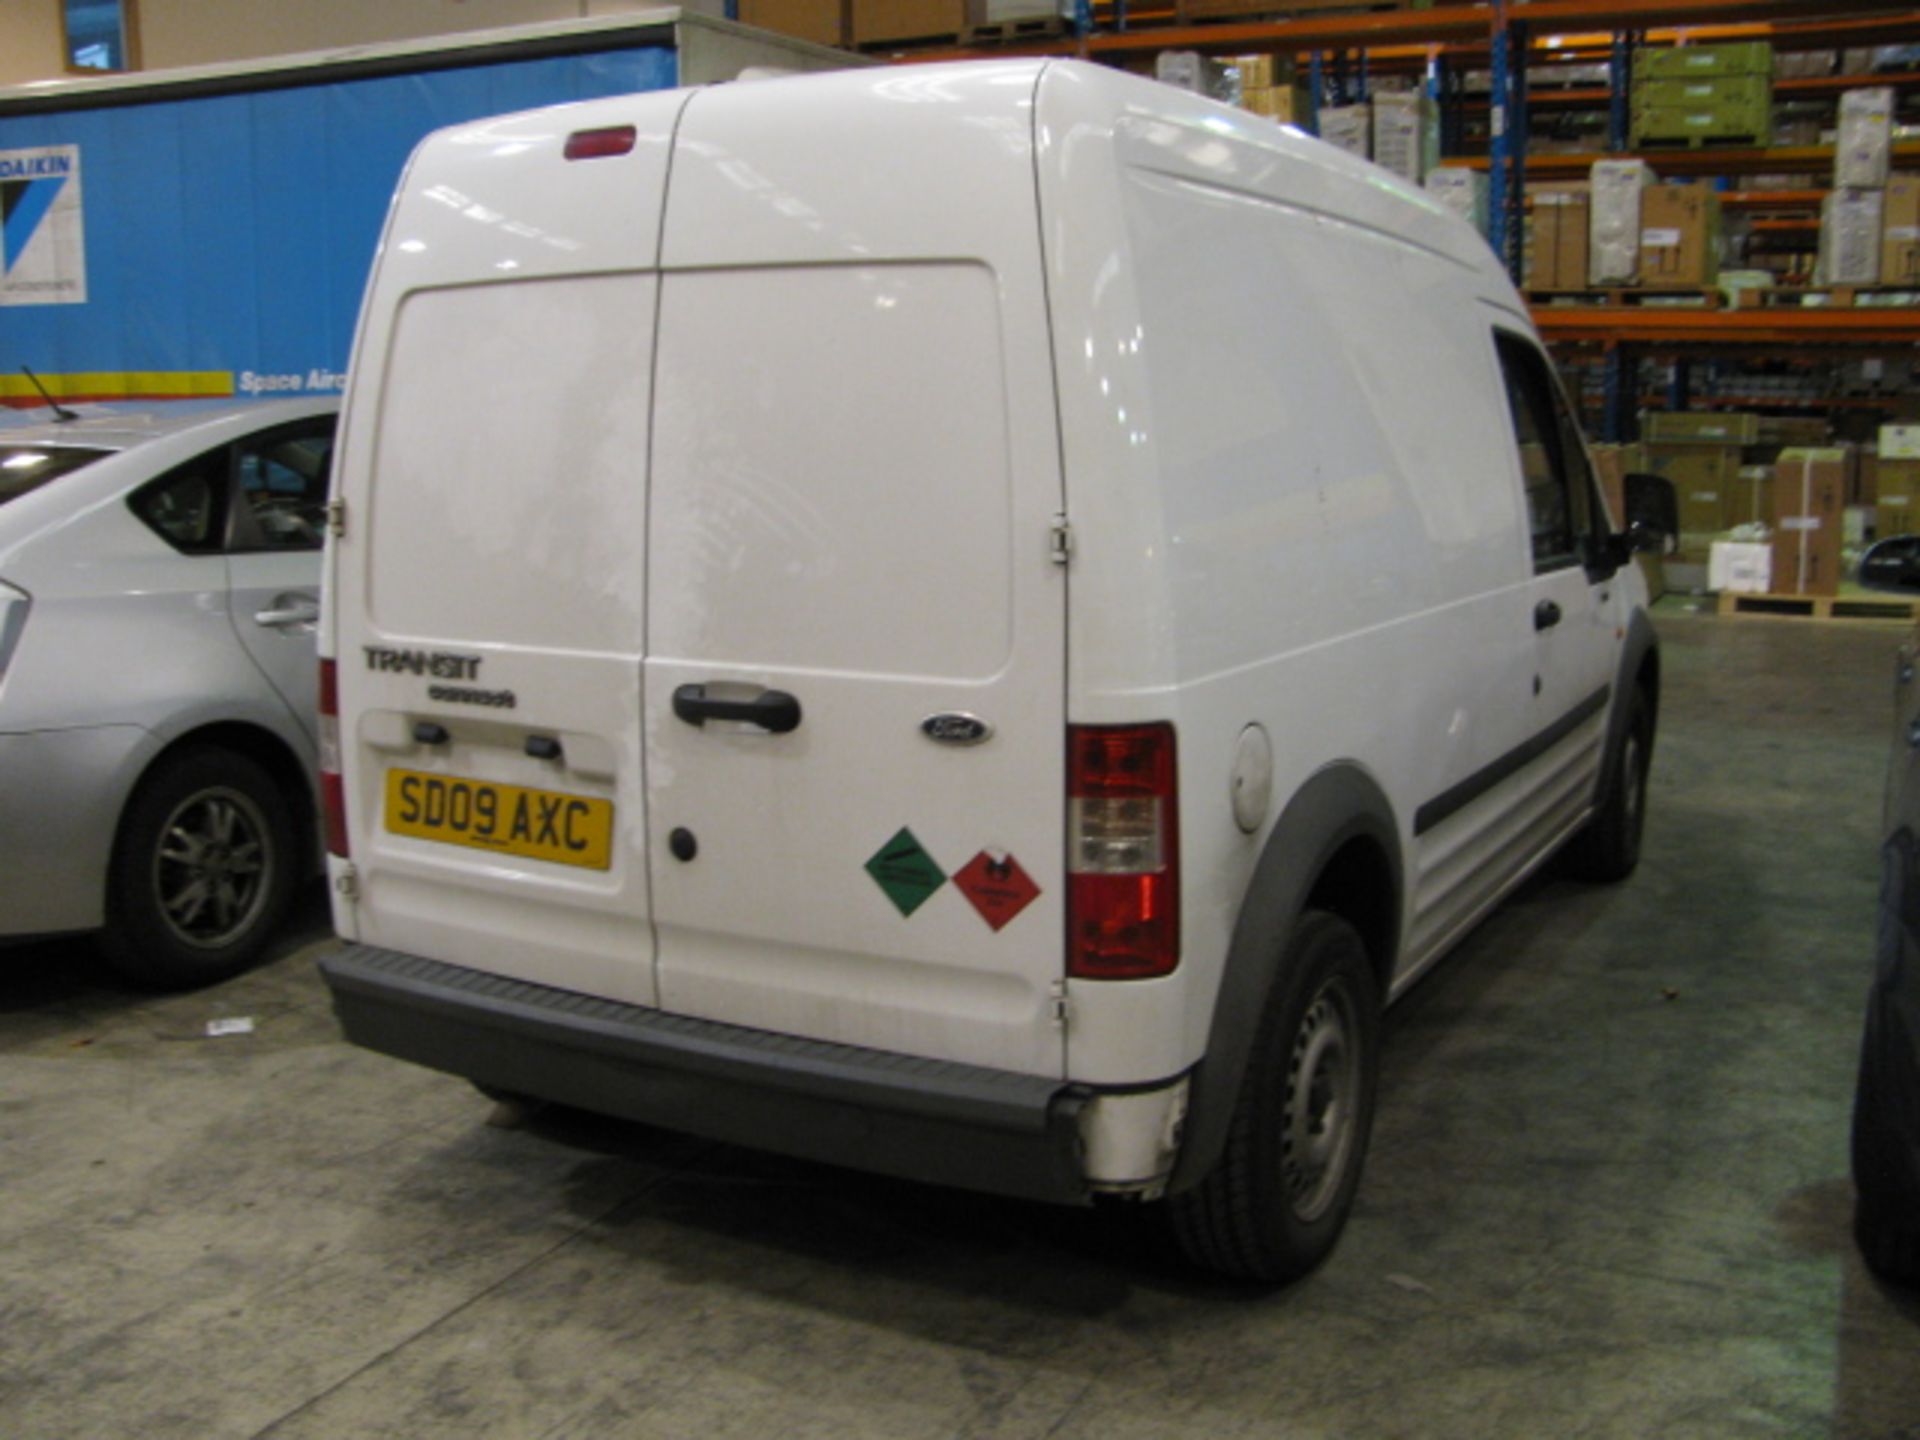 Ford Transit Connect 90T 230L reg SD09 AXC miles 68,427 - Image 4 of 4